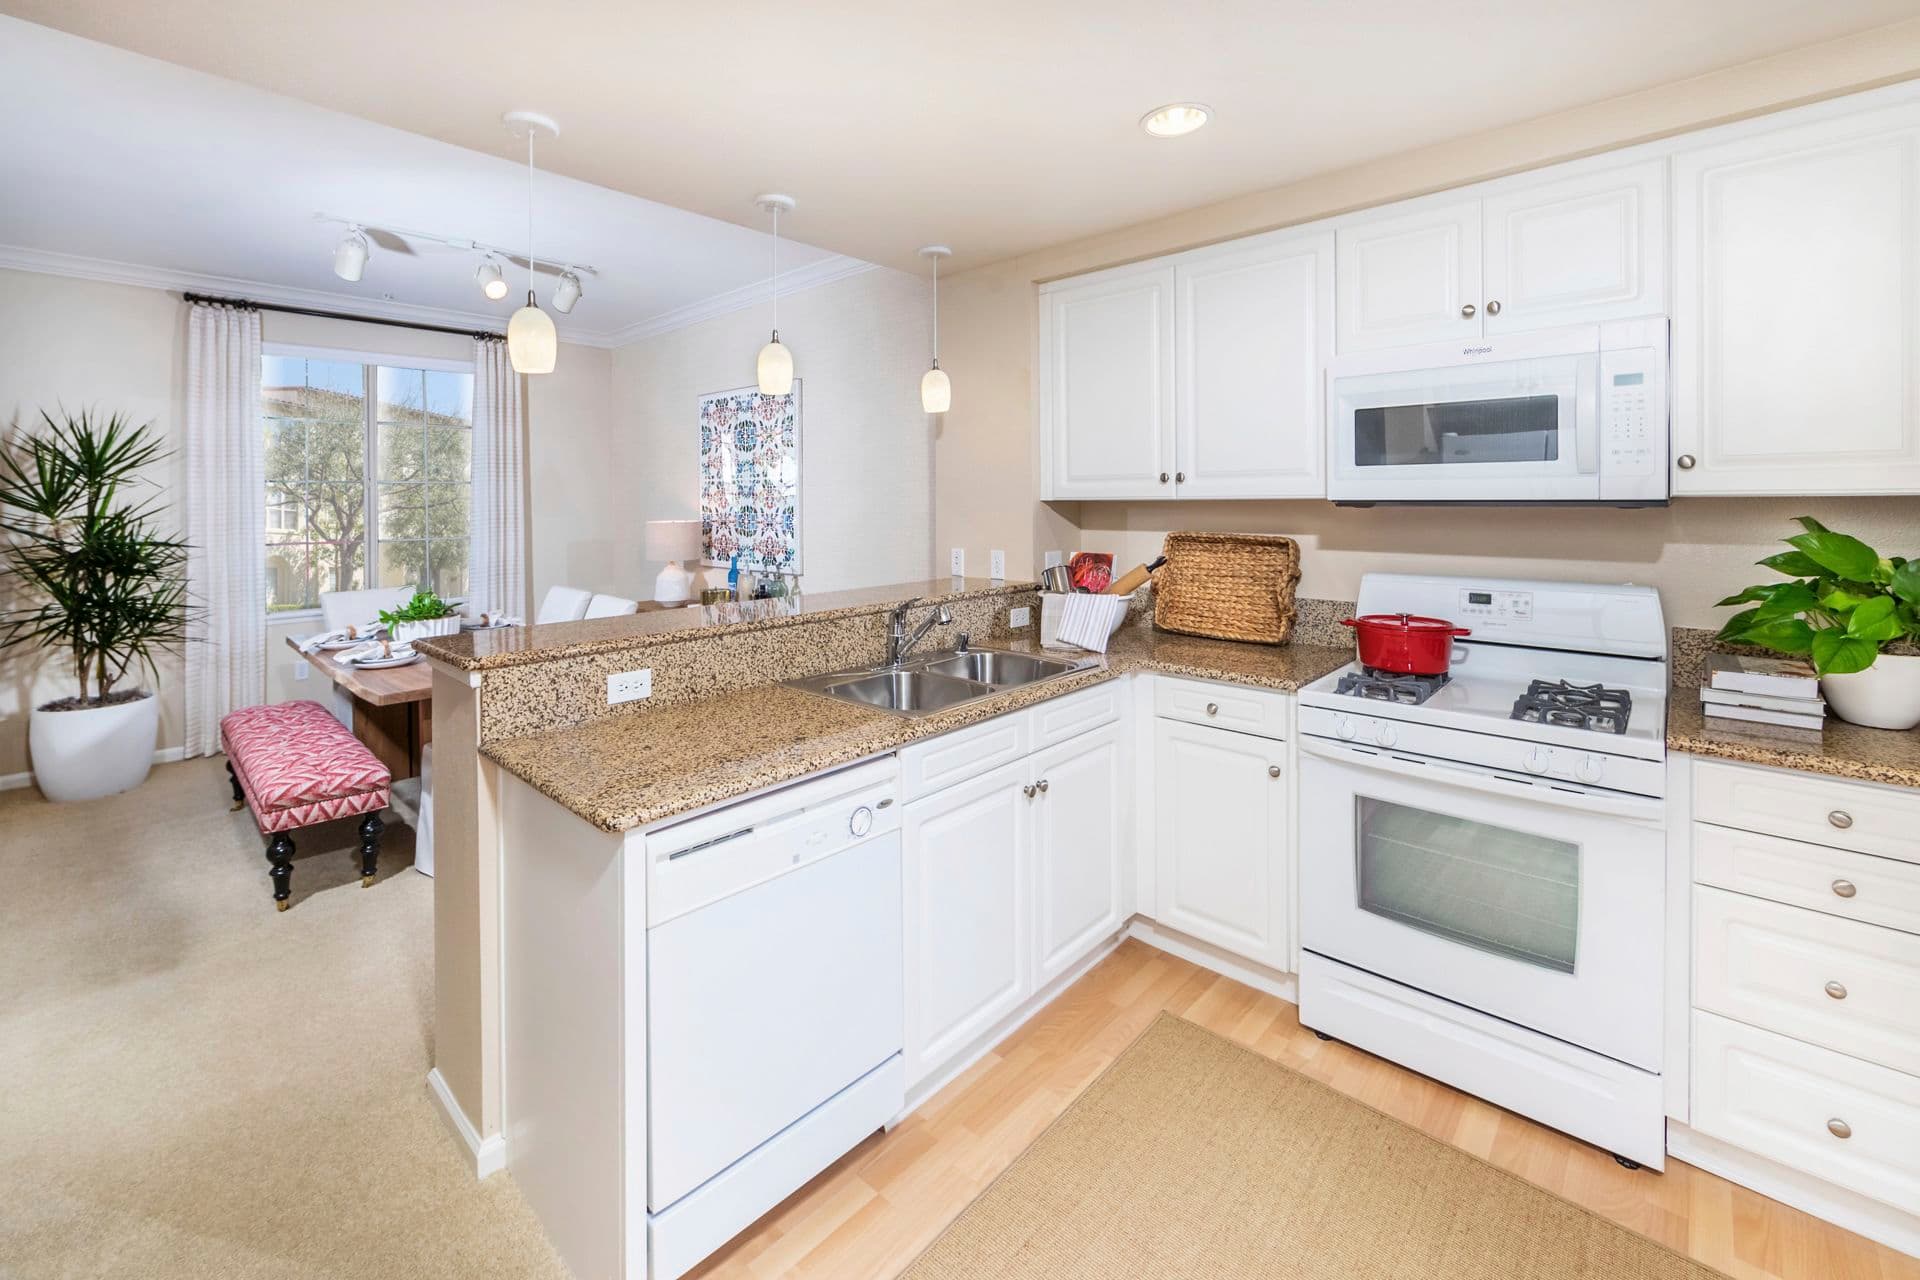 Interior view of Kitchen at Woodbury Lane Apartment Homes in Irvine, CA.